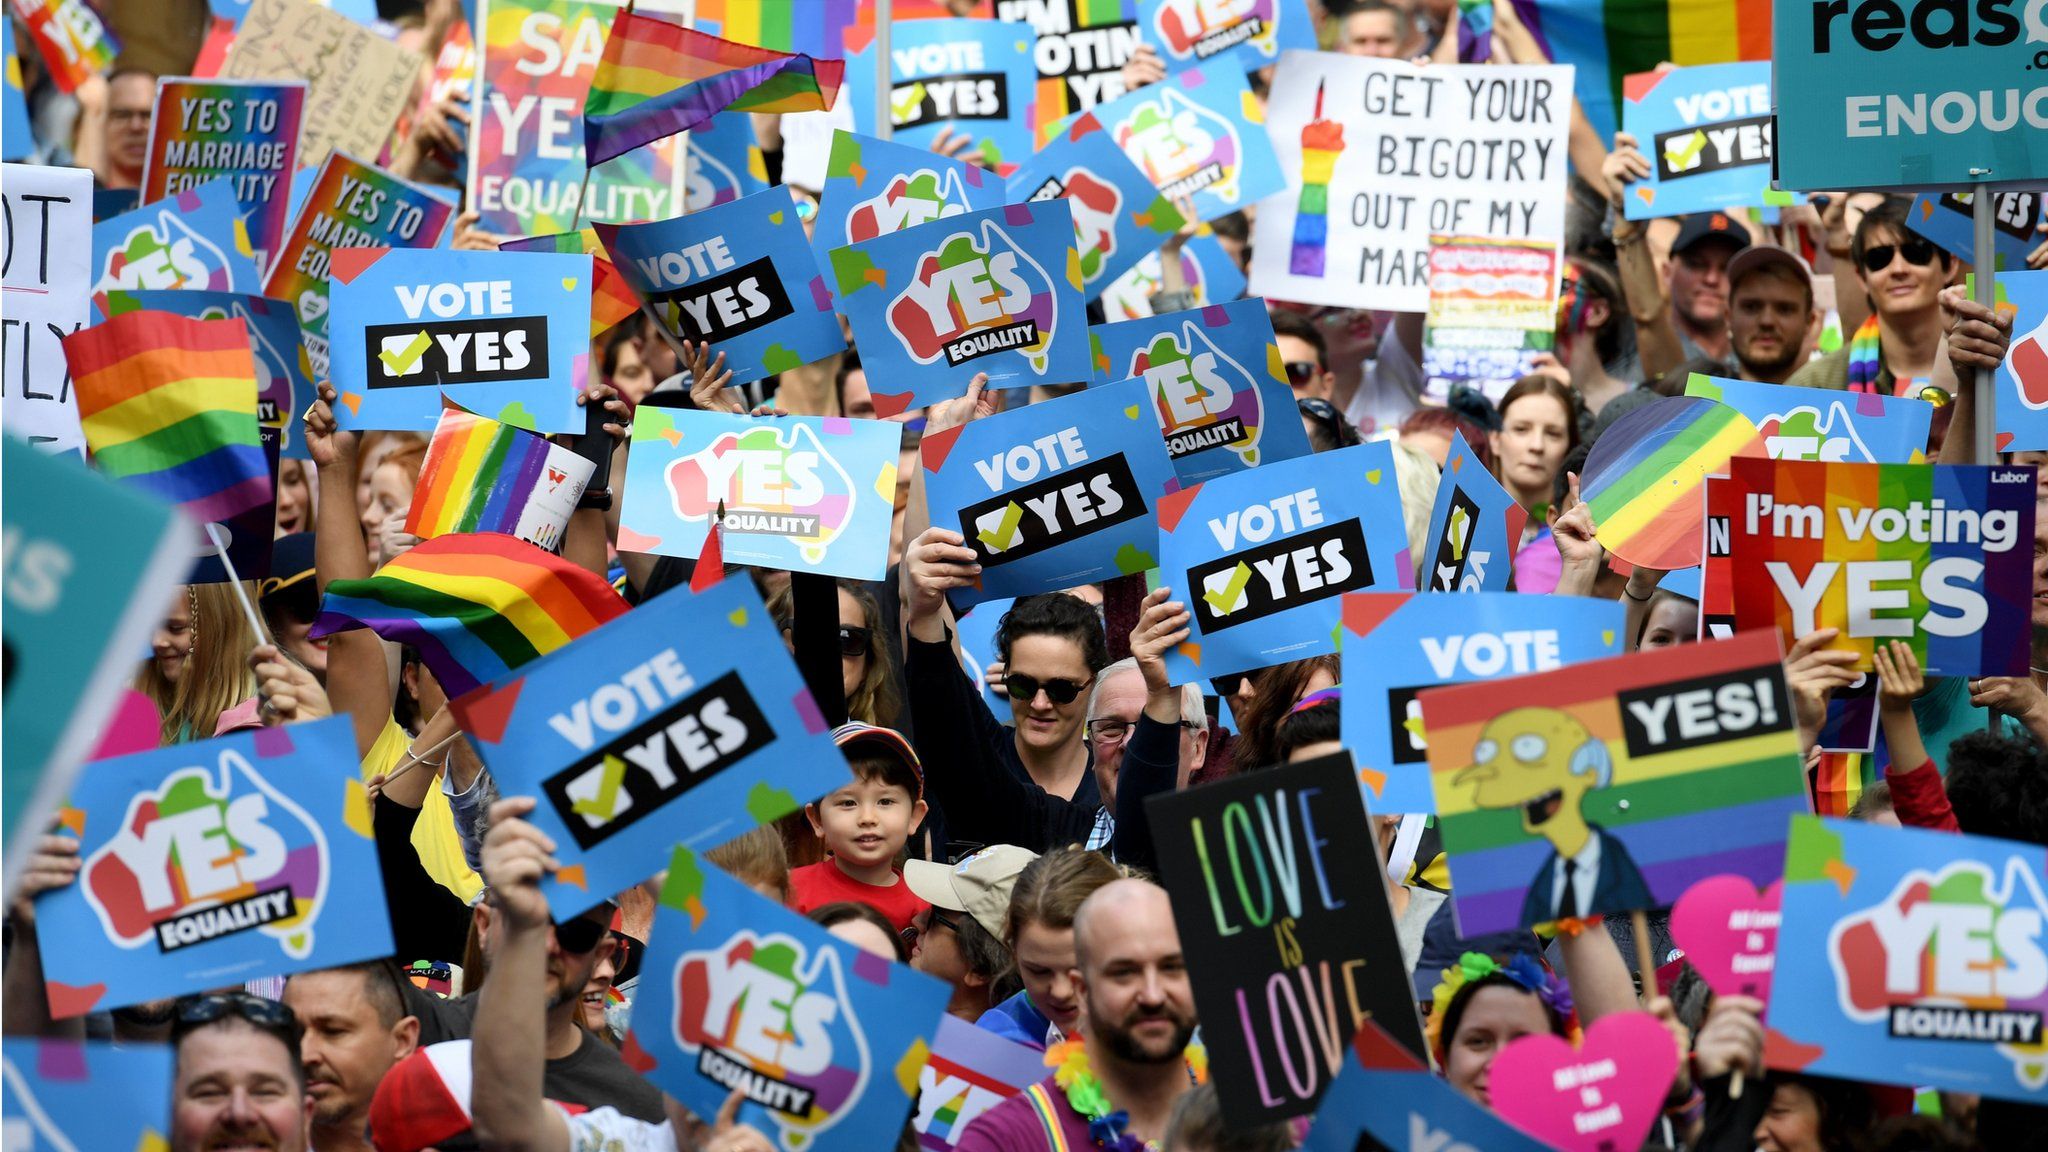 Protestors gather for a rally in support for marriage equality in Sydney, Australia, 10 September 2017